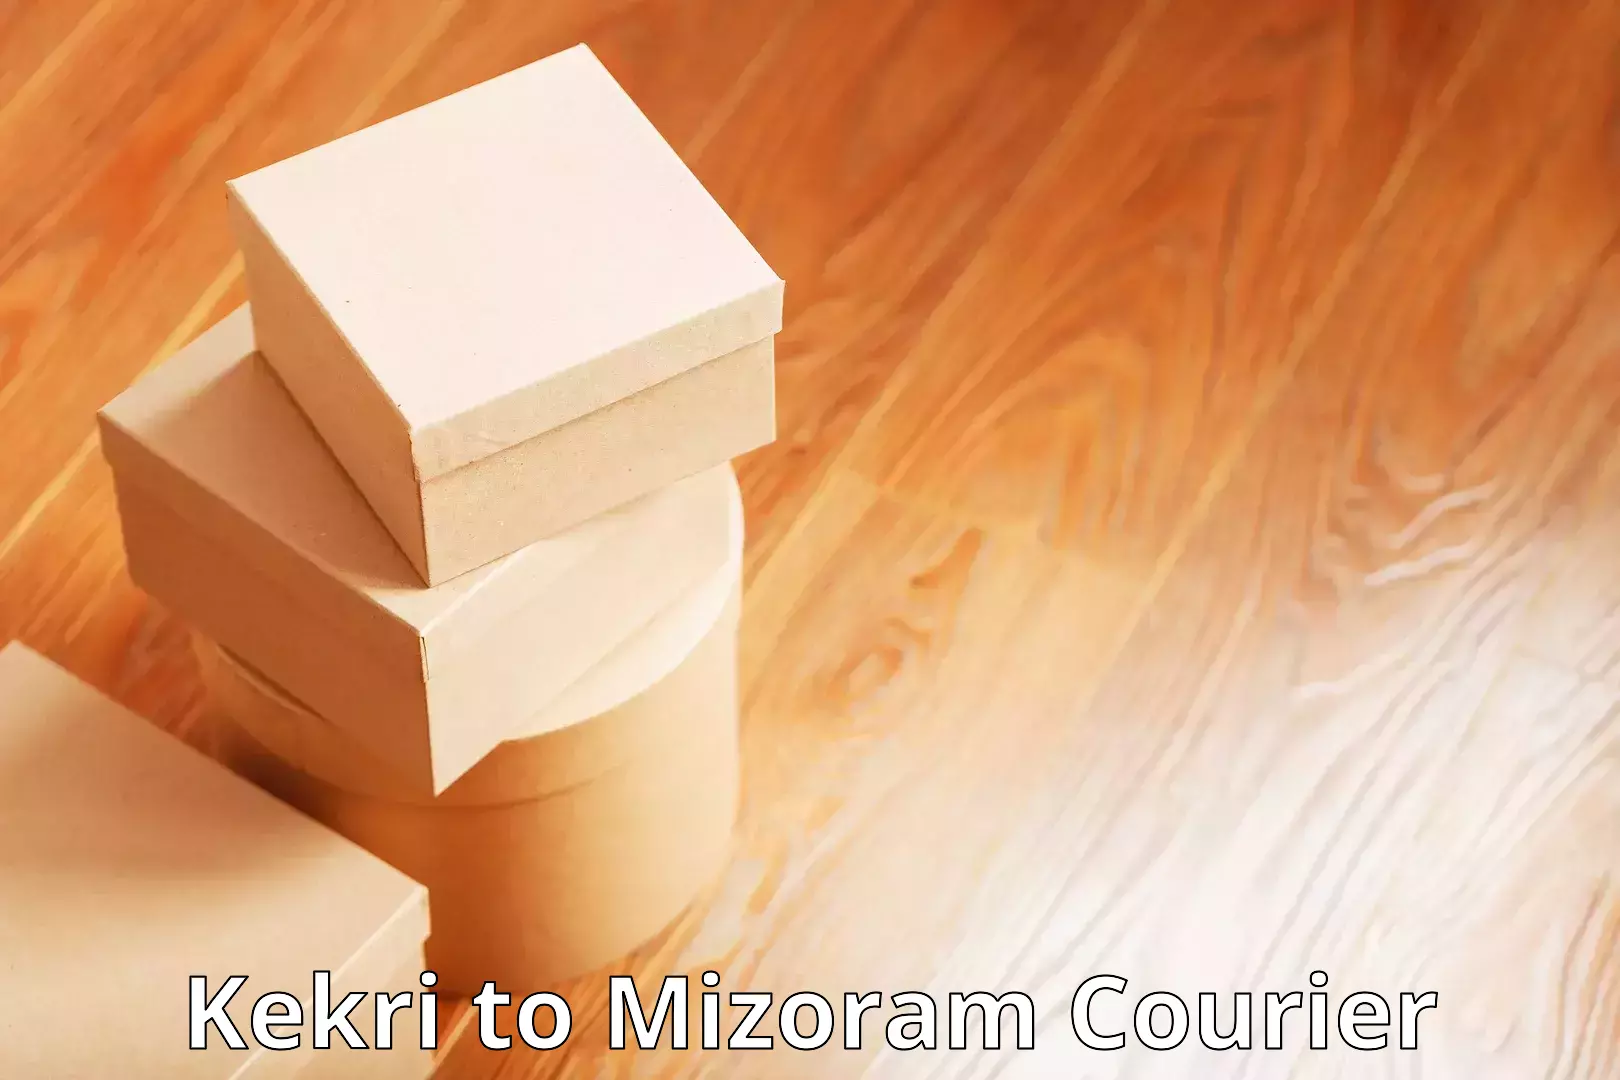 Express delivery solutions Kekri to Mizoram